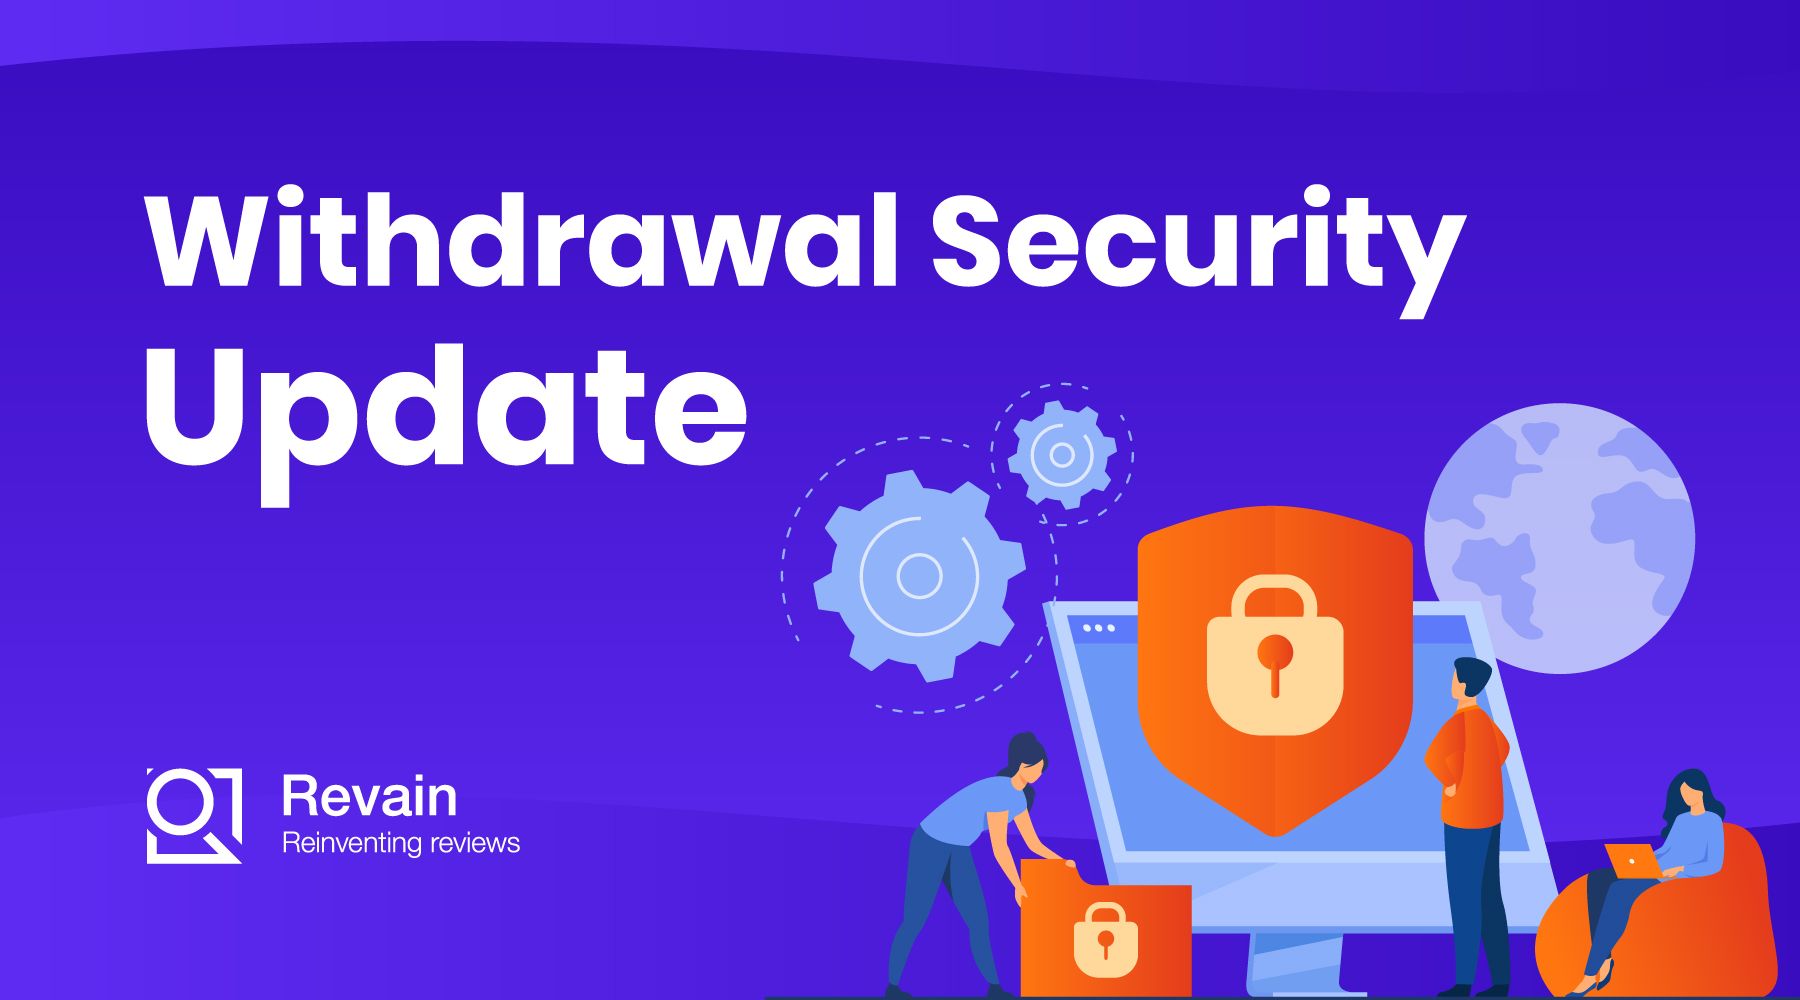 Article Withdrawal Security Update